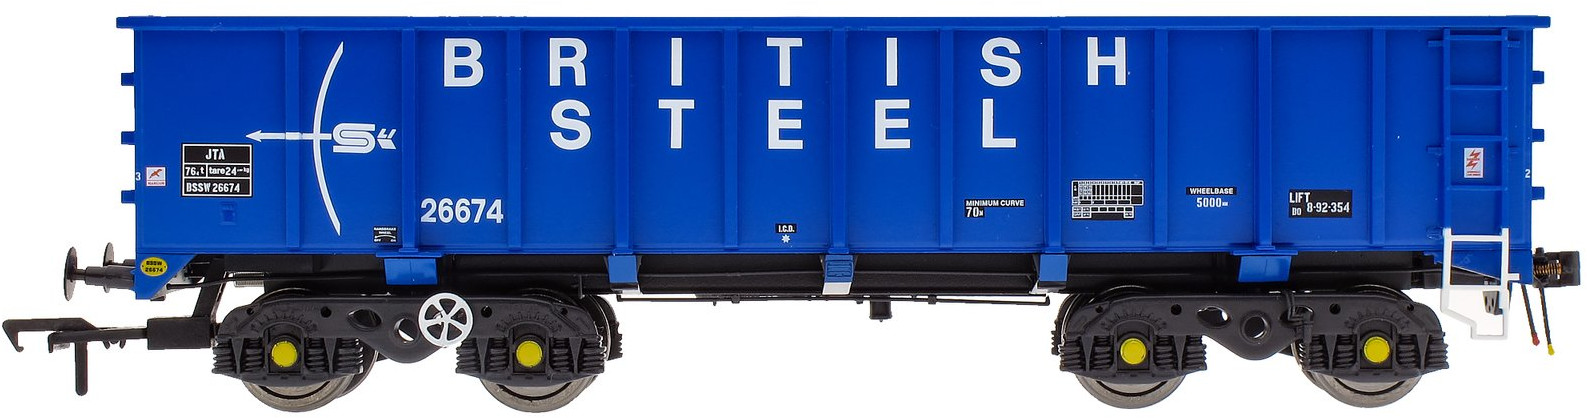 Accurascale ACC2103BSCB Tippler Wagon British Steel BSSW26674 Image